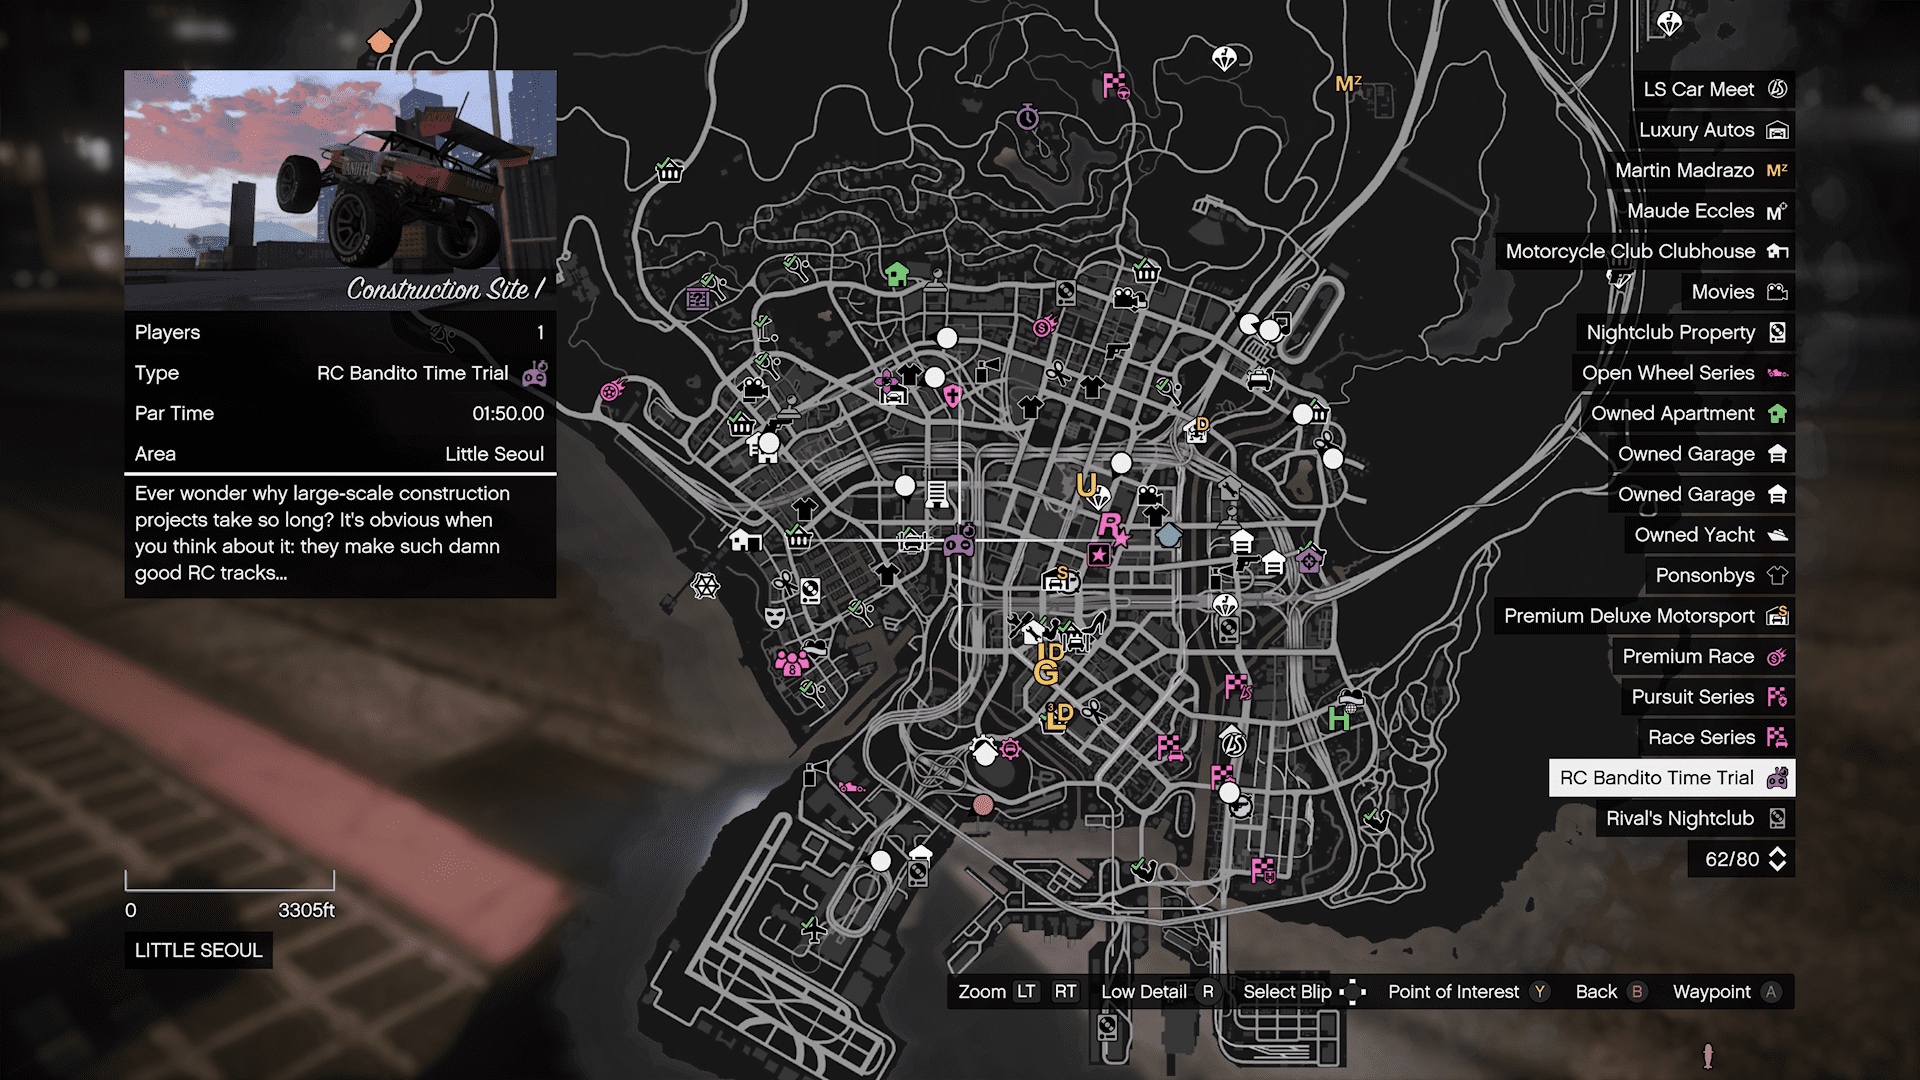 GTA Online - Here's Map Showing Ferry Spots For the Casino Limousine